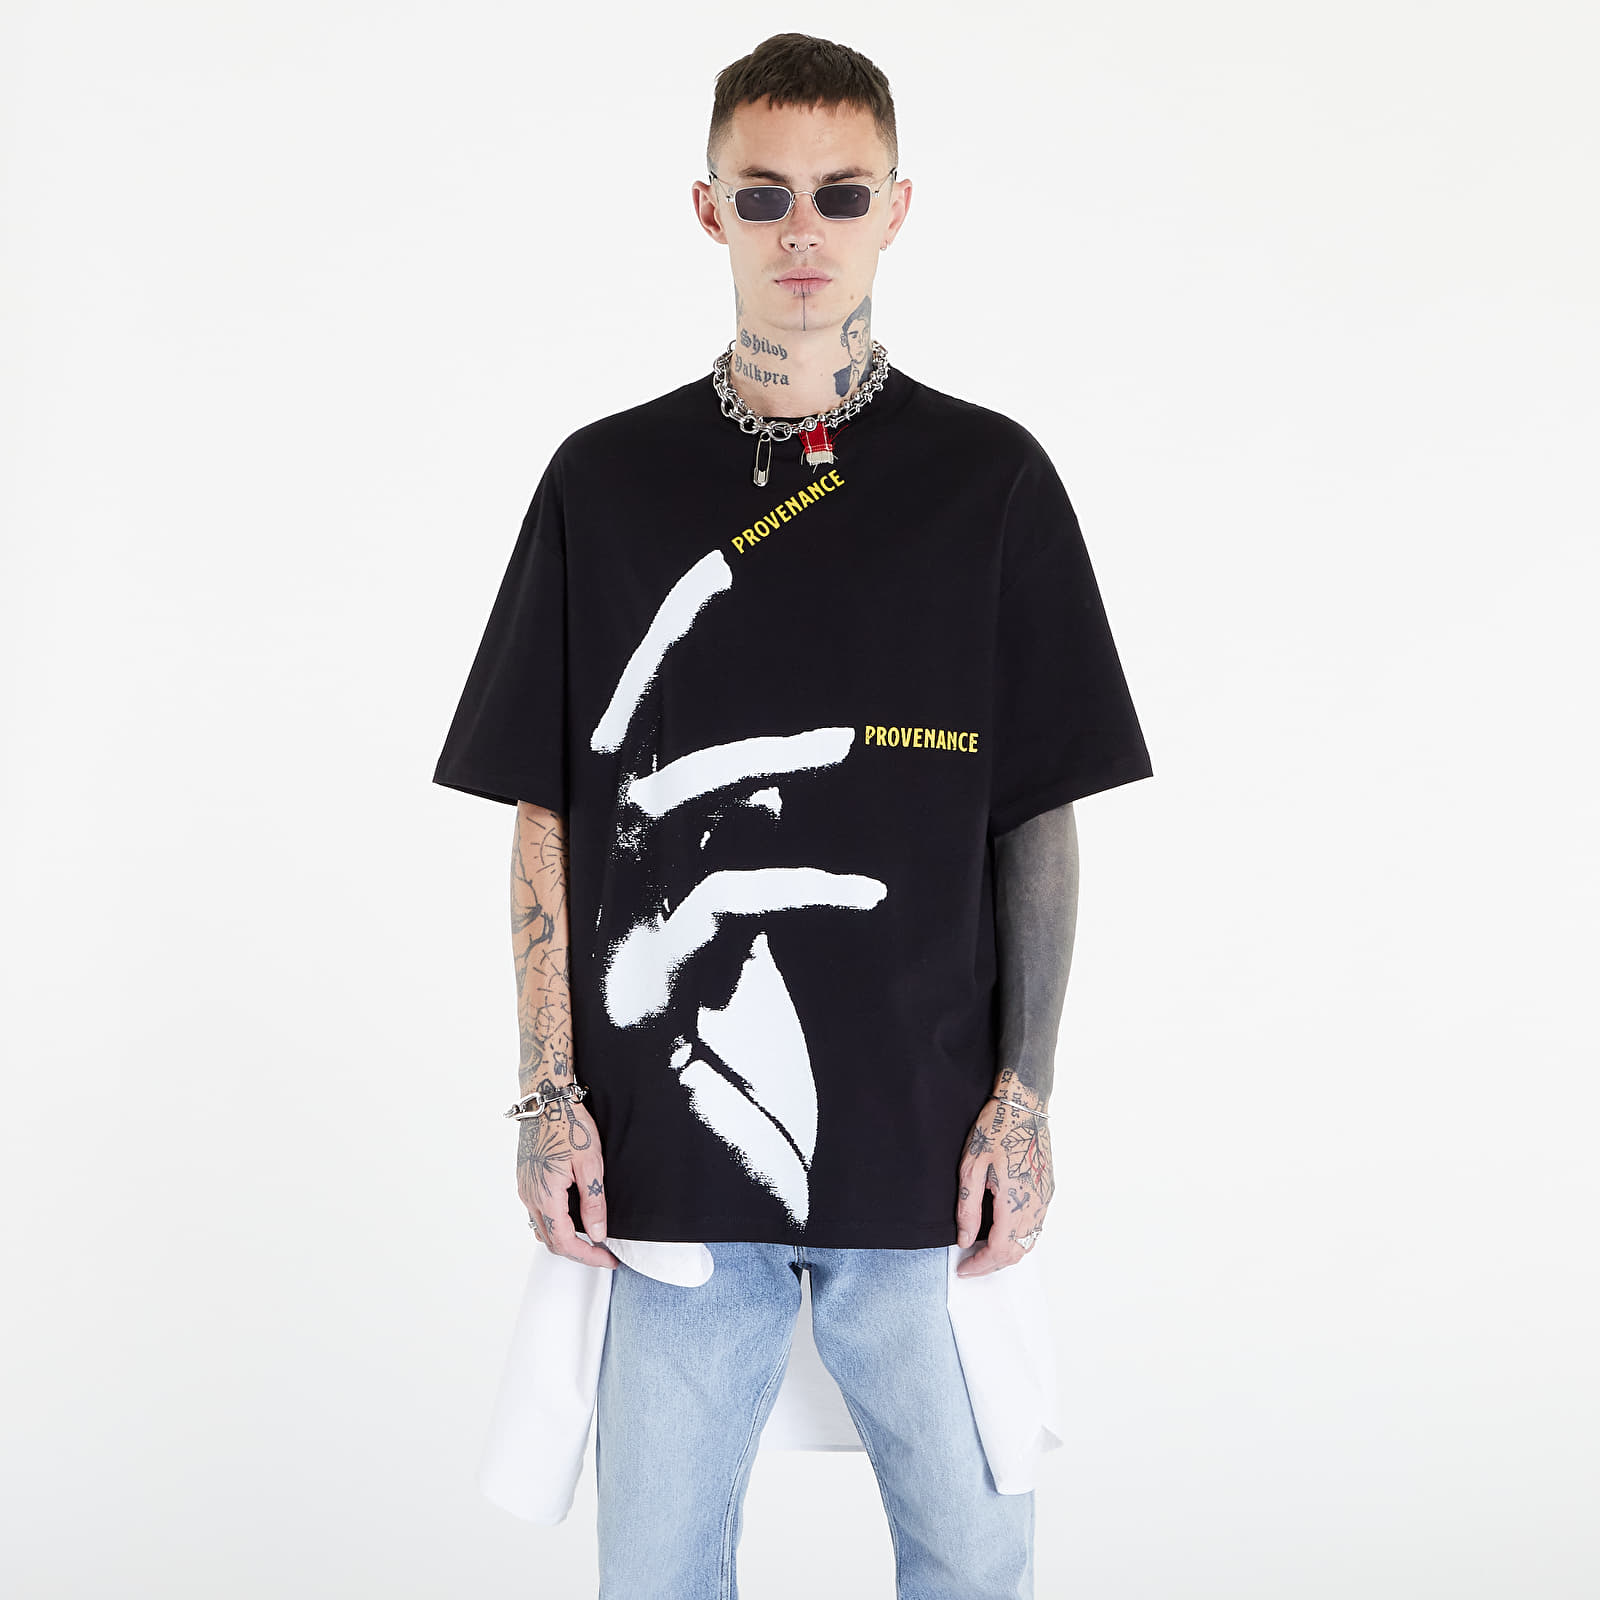 T-shirts RAF SIMONS Overzised T-Shirt With Nails Print Front And Back Black